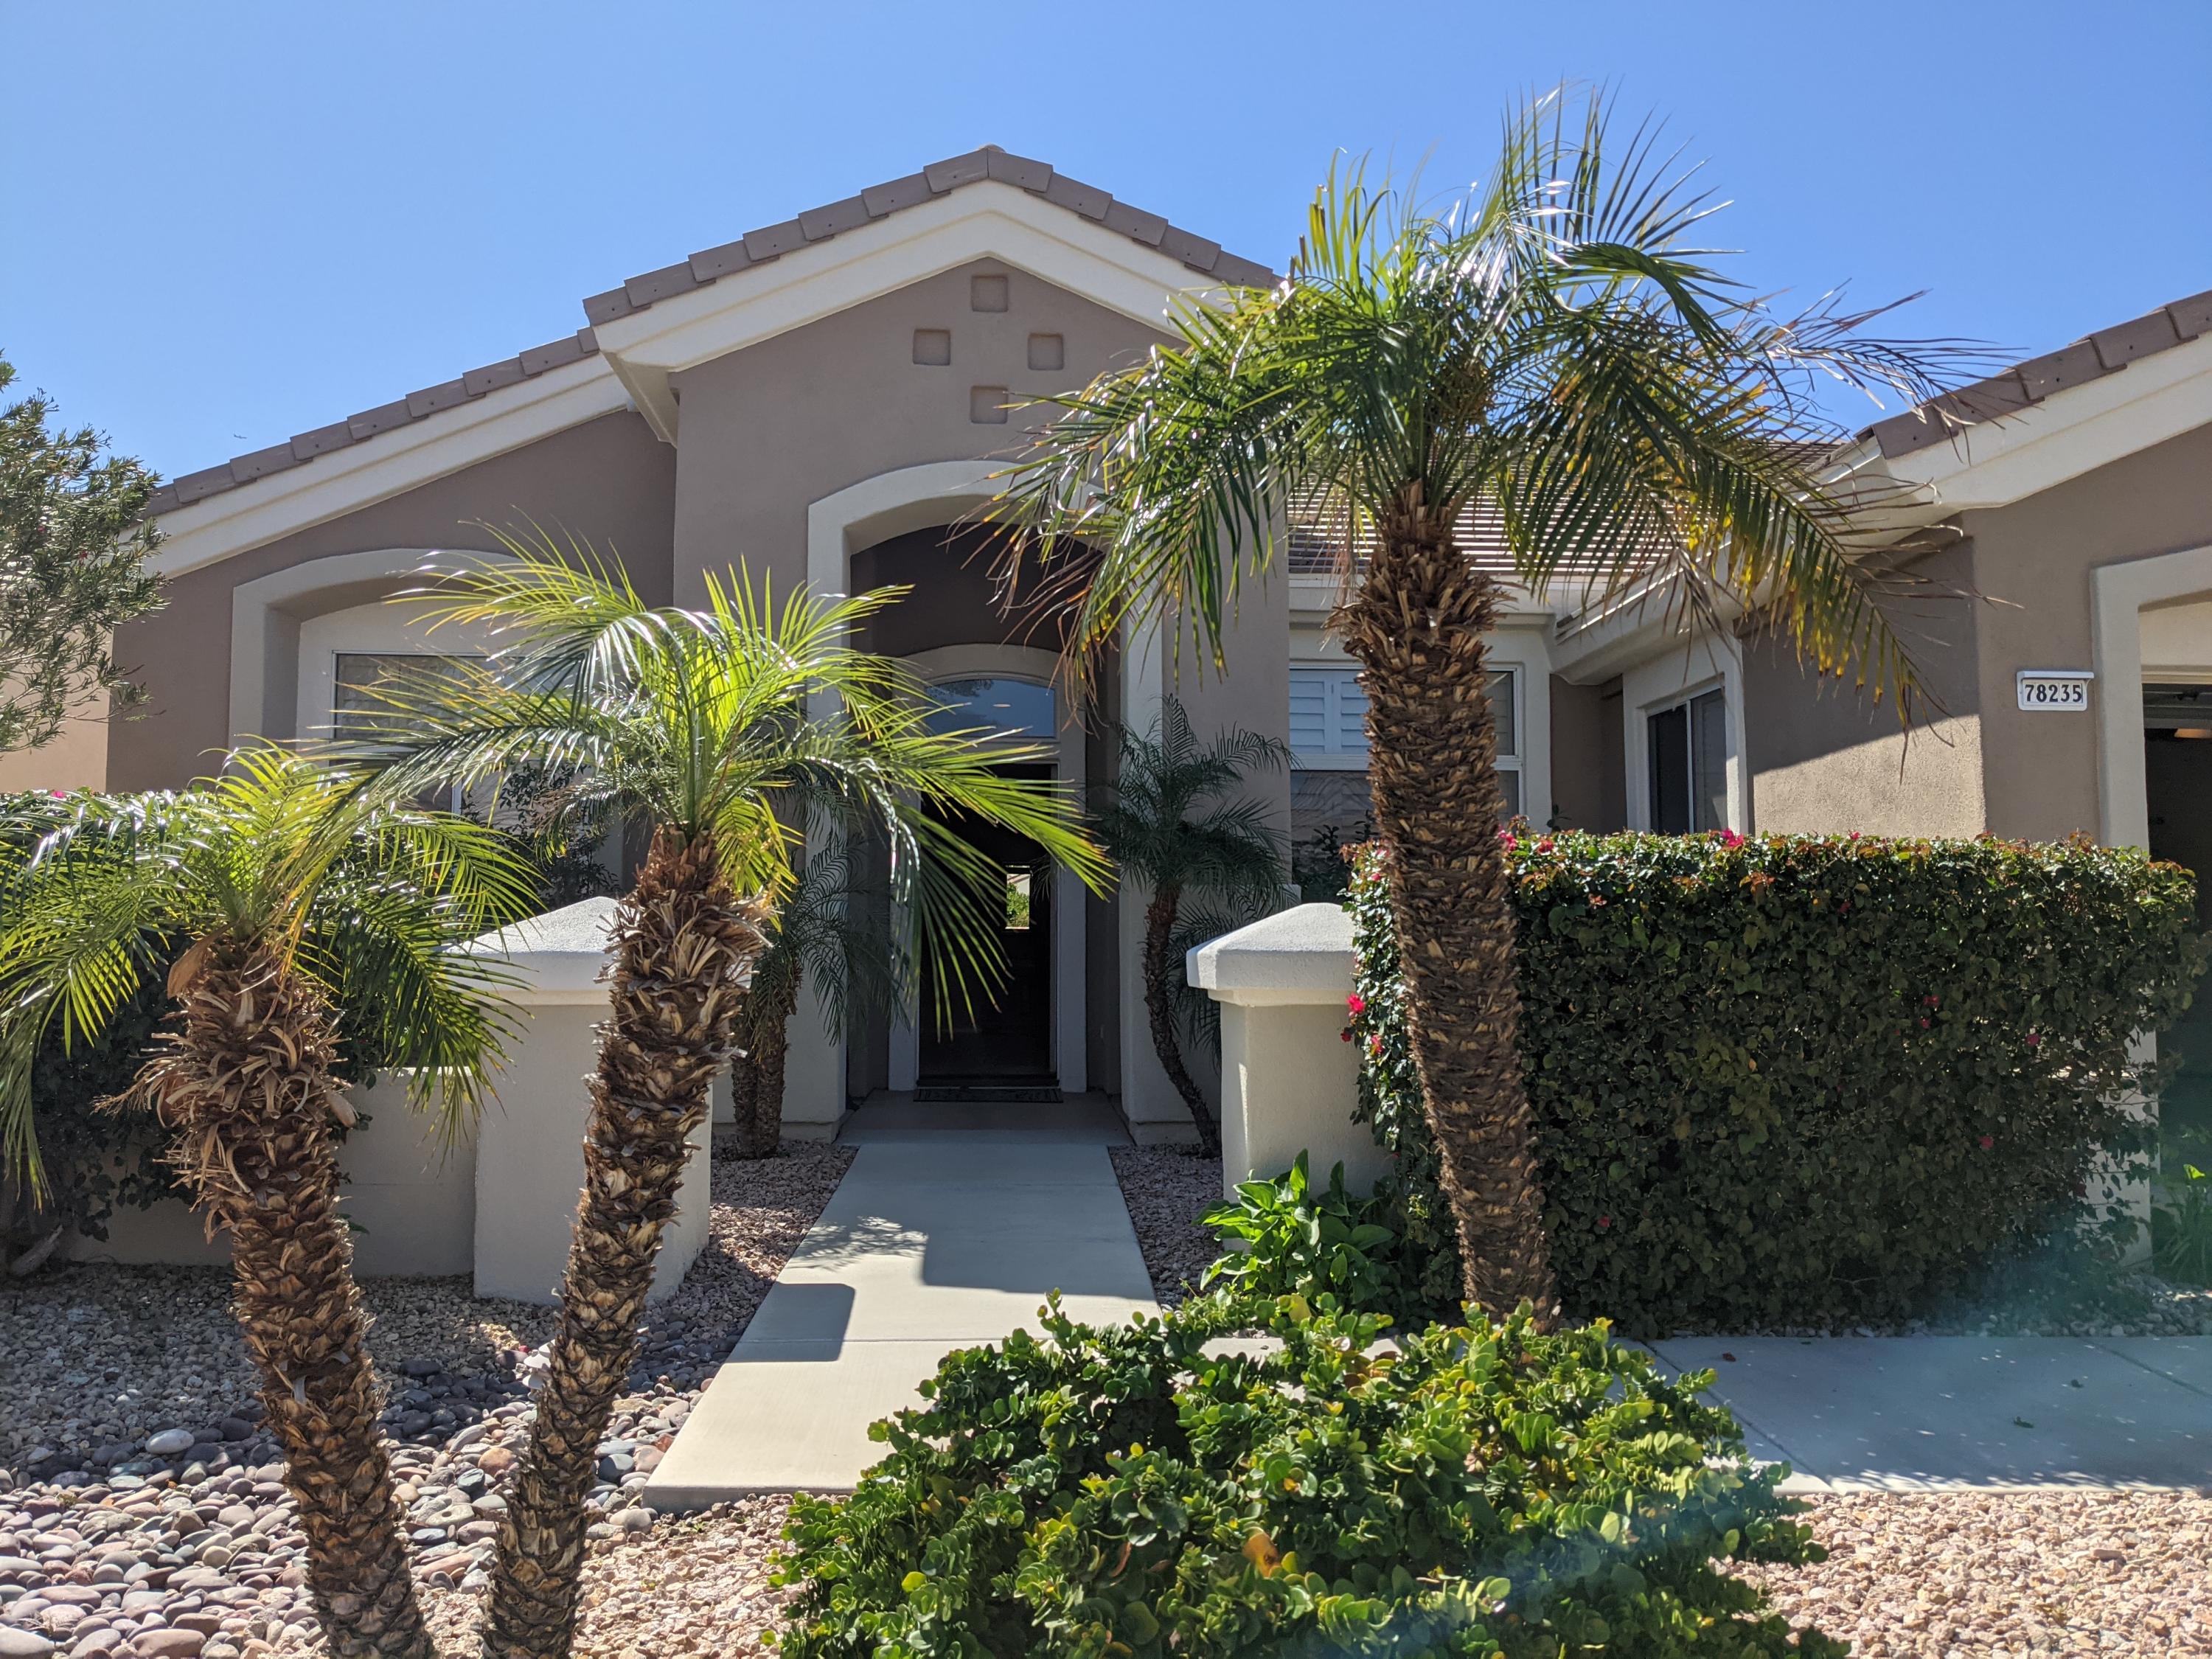 Image Number 1 for 78235 Cloveridge Way in Palm Desert